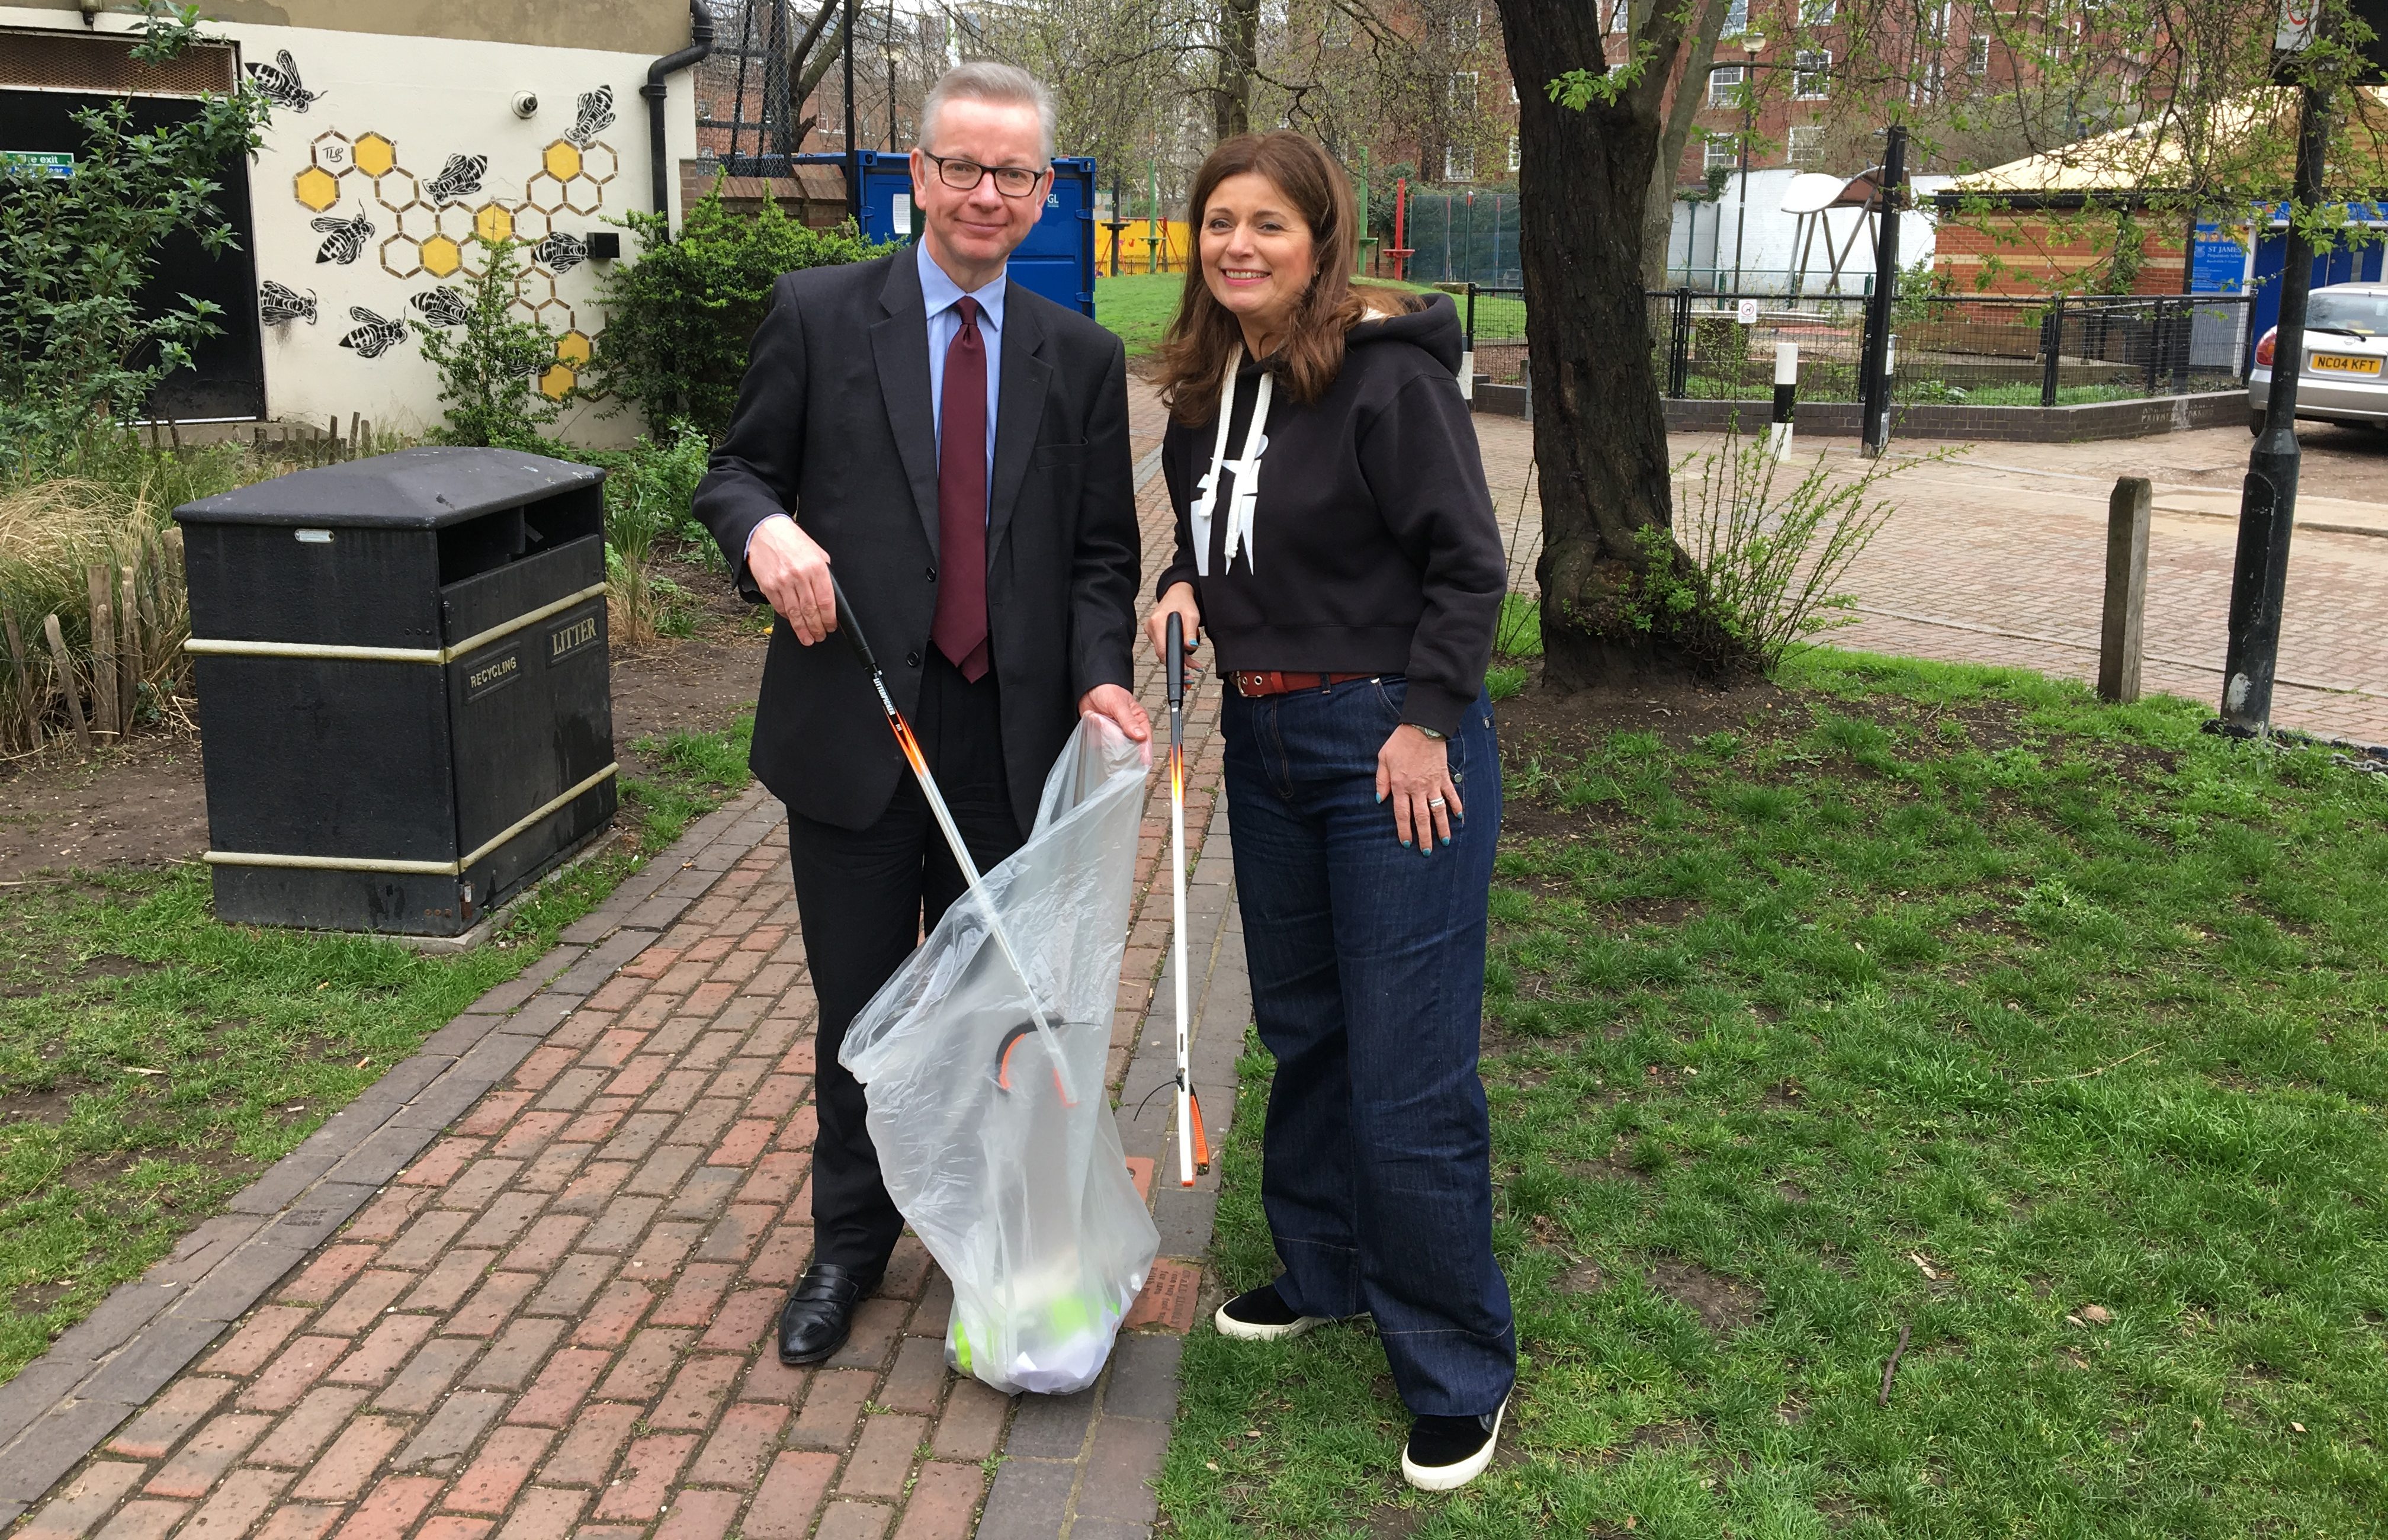 Environment Secretary Michael Gove at a litter pick in a West London park with Keep Britain Tidy's Chief Executive Allison Ogden-Newton